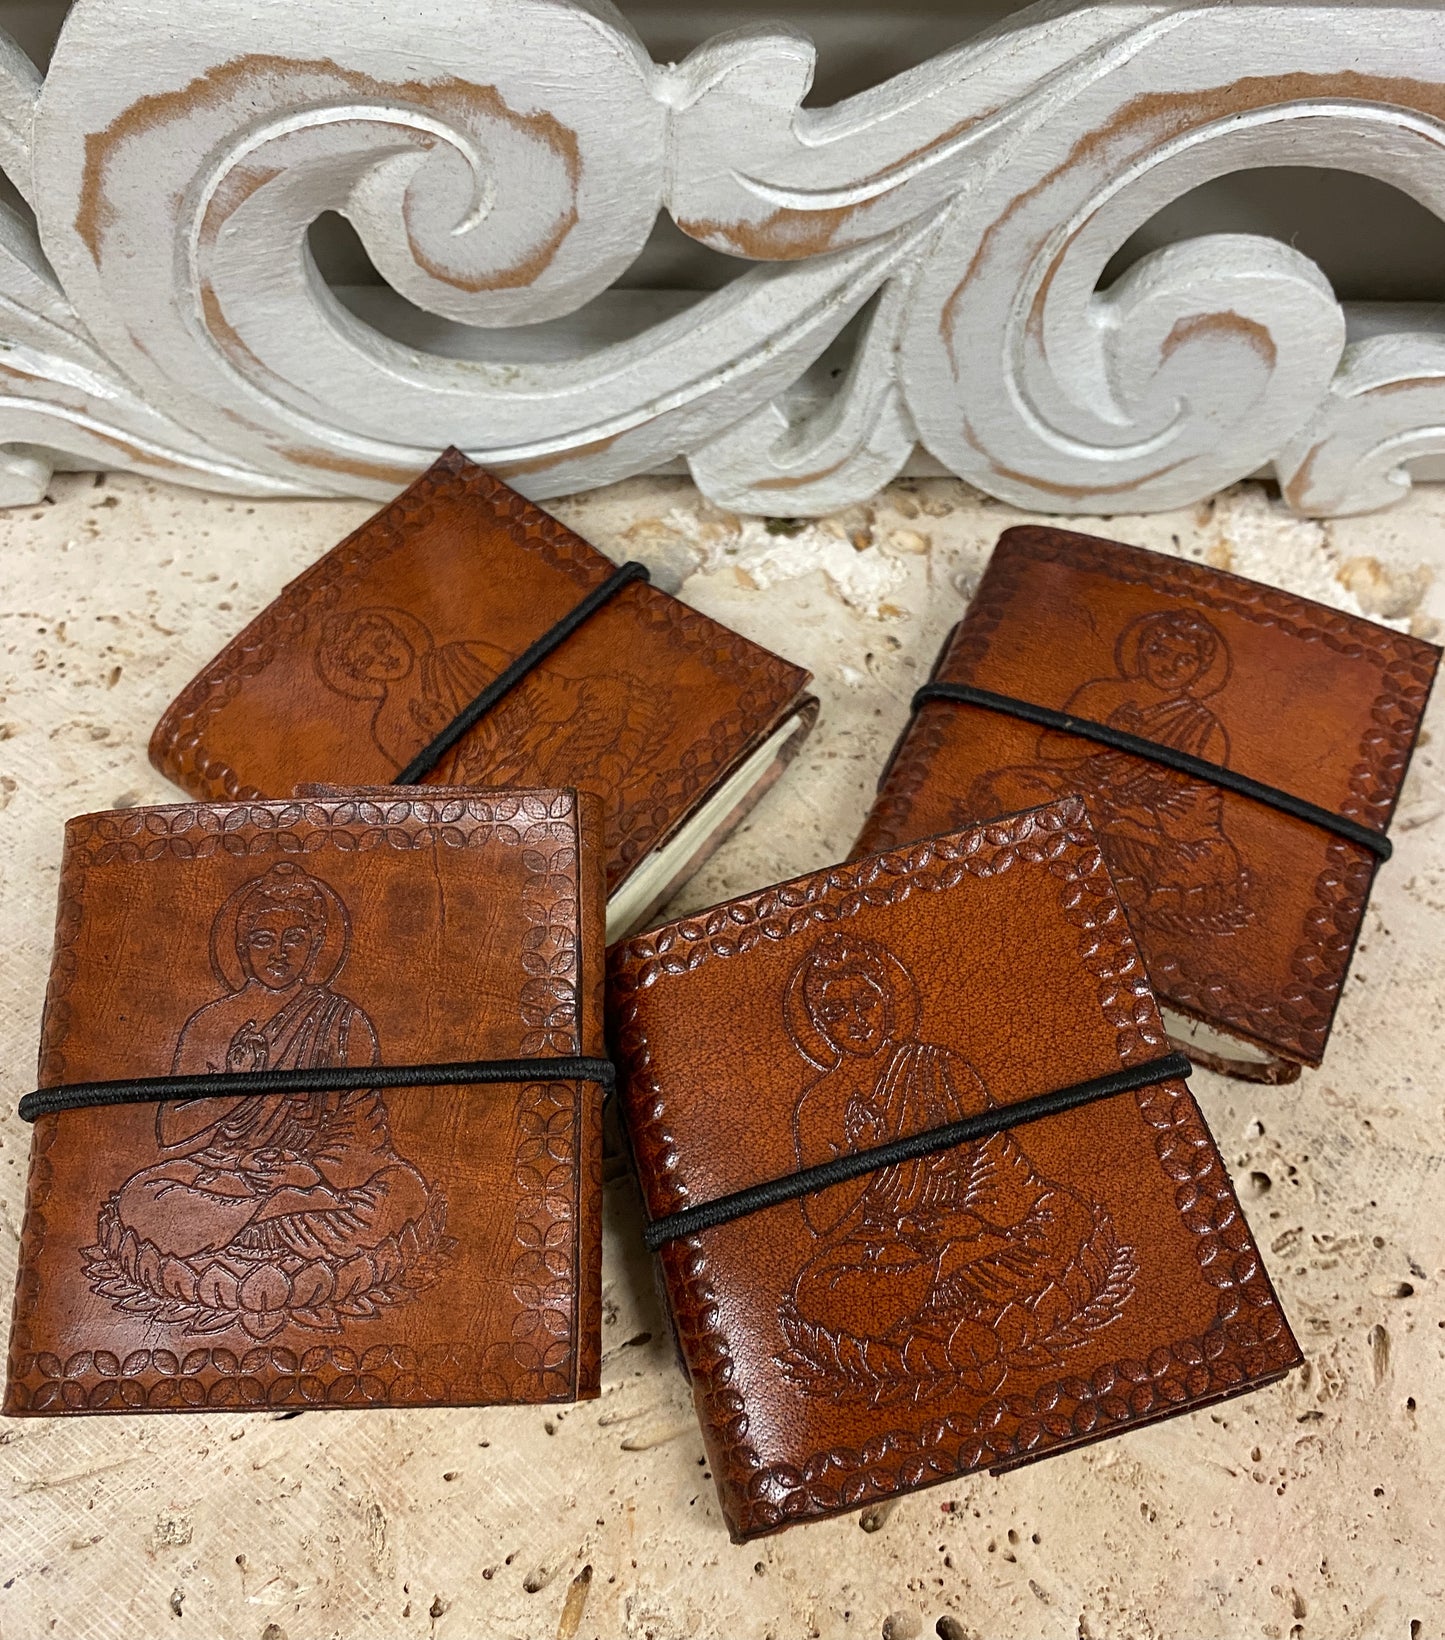 Mini Hand Embossed Camel leather Journal - Available in 4 Designs 3" x 3"